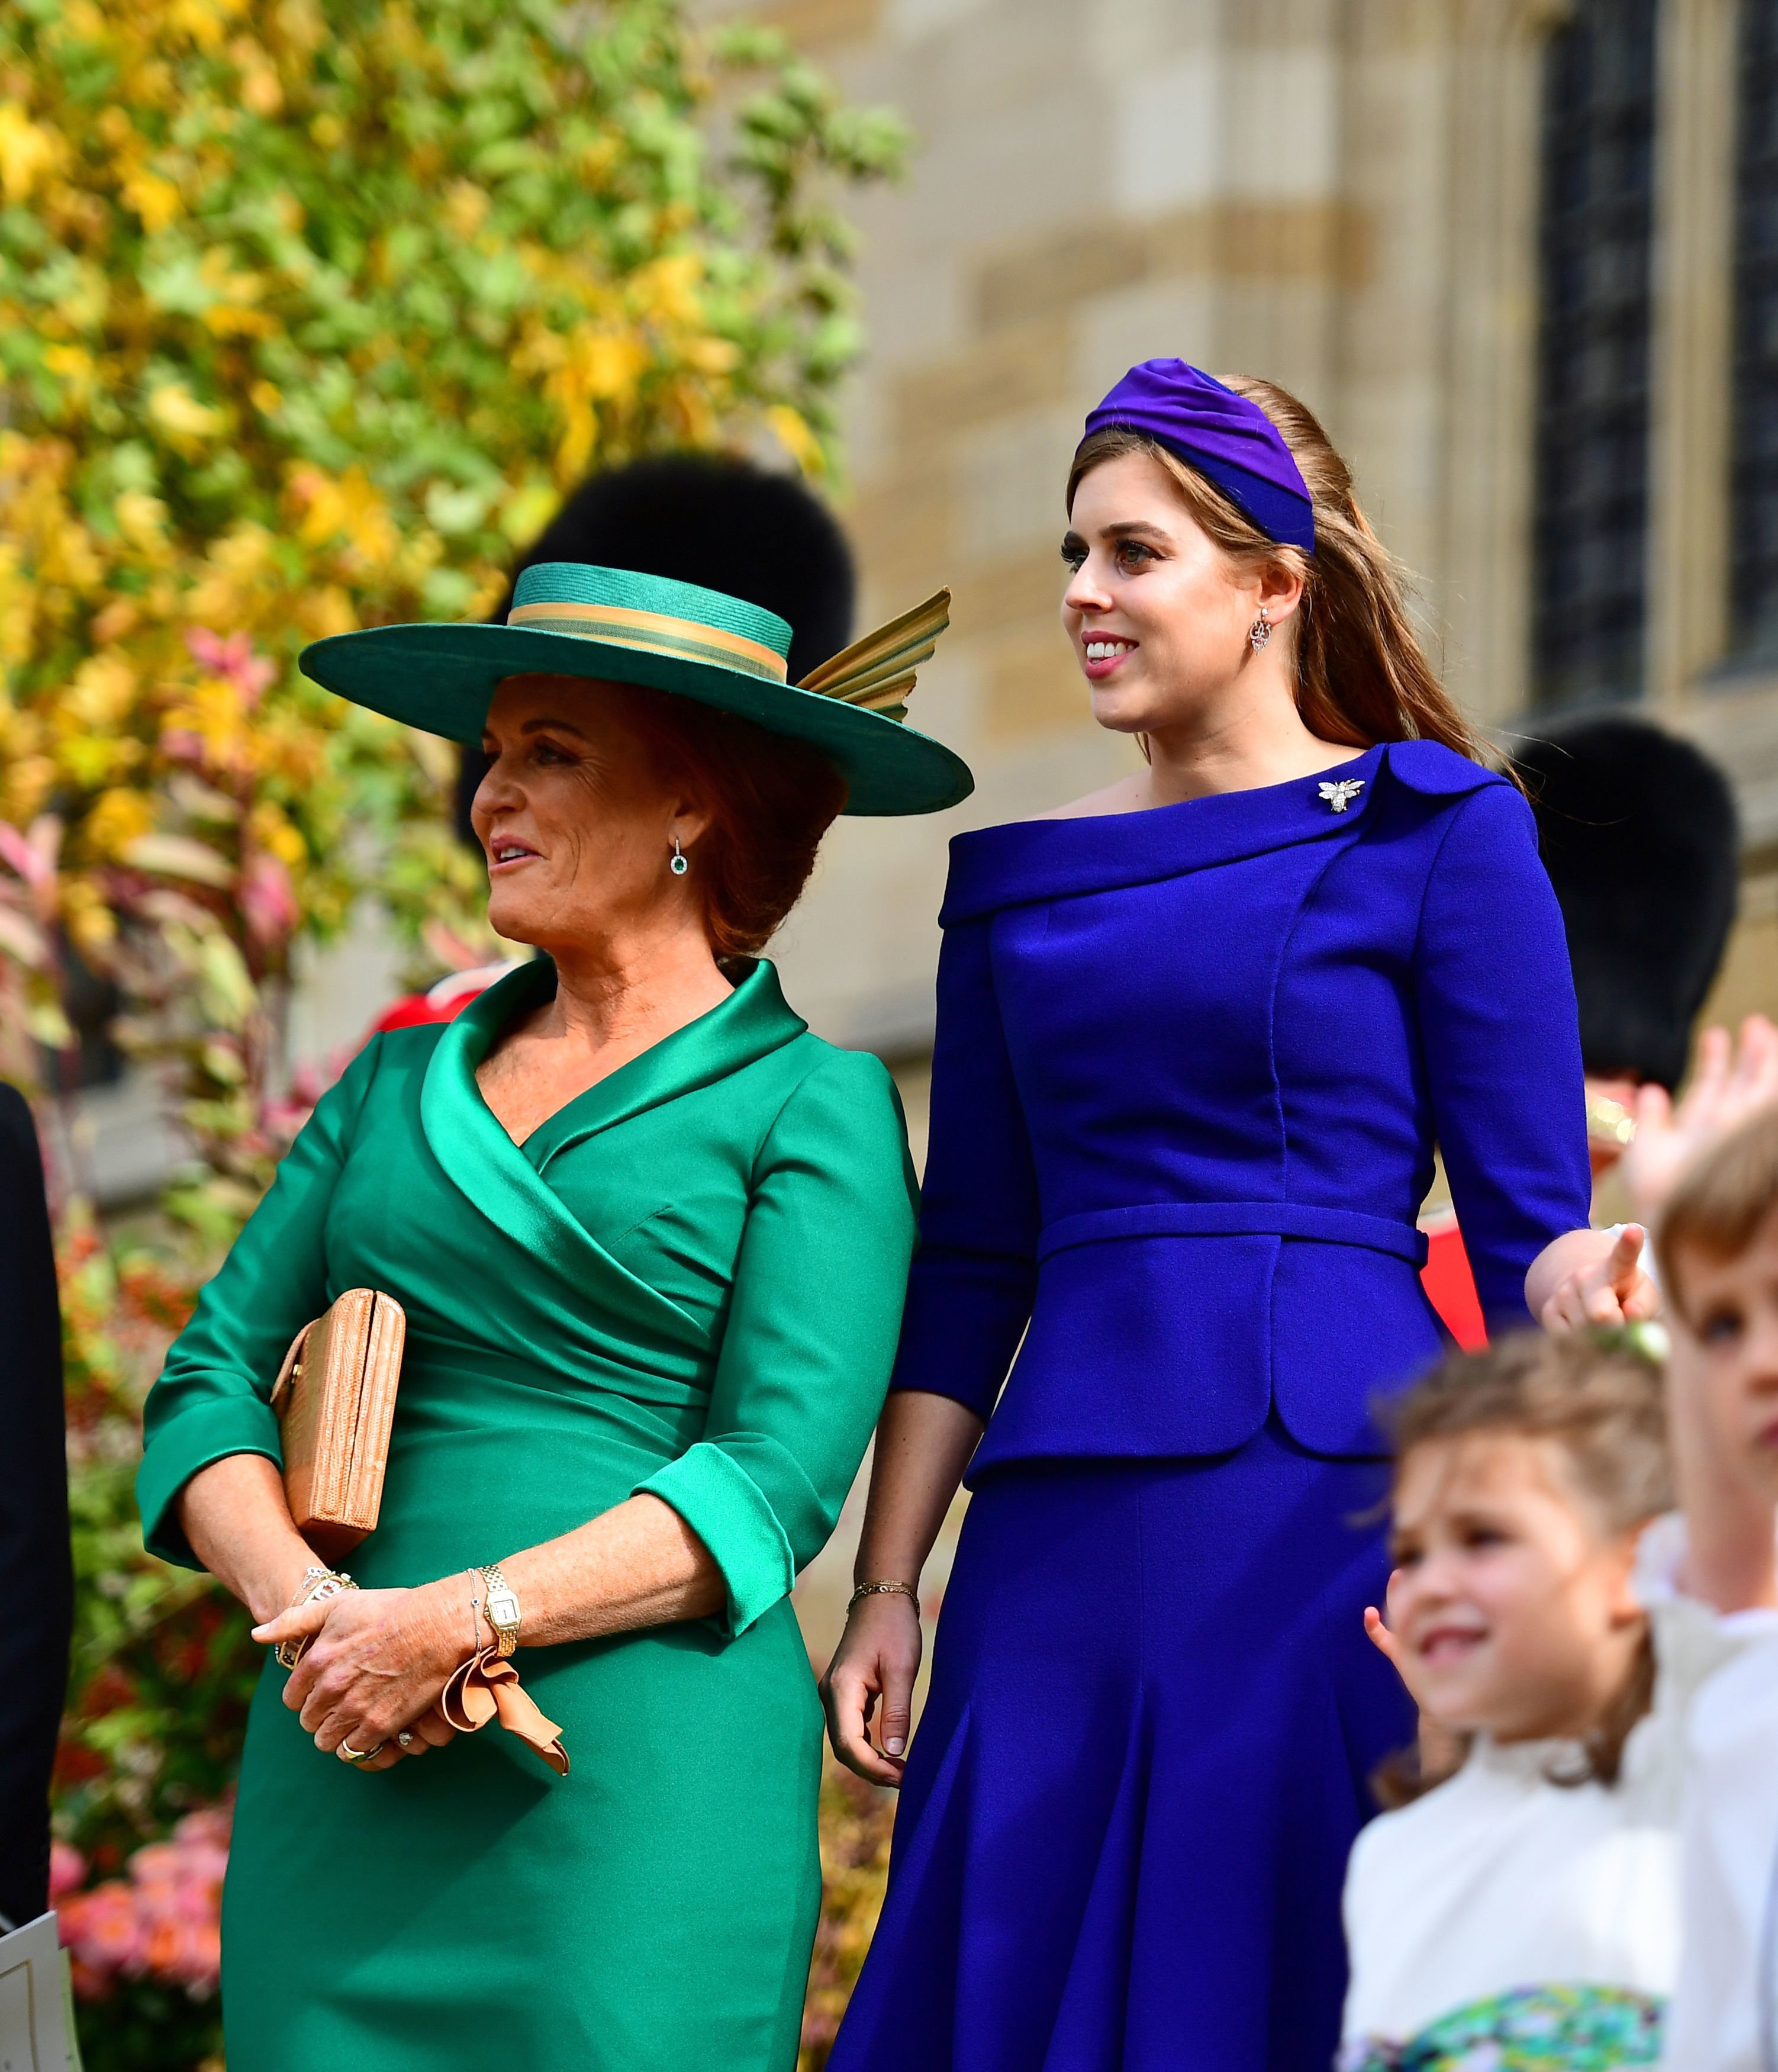 Sarah Ferguson and her daughter Princess Beatrice at Princess Eugenie's royal wedding in October 2018 | Photo: Getty Images